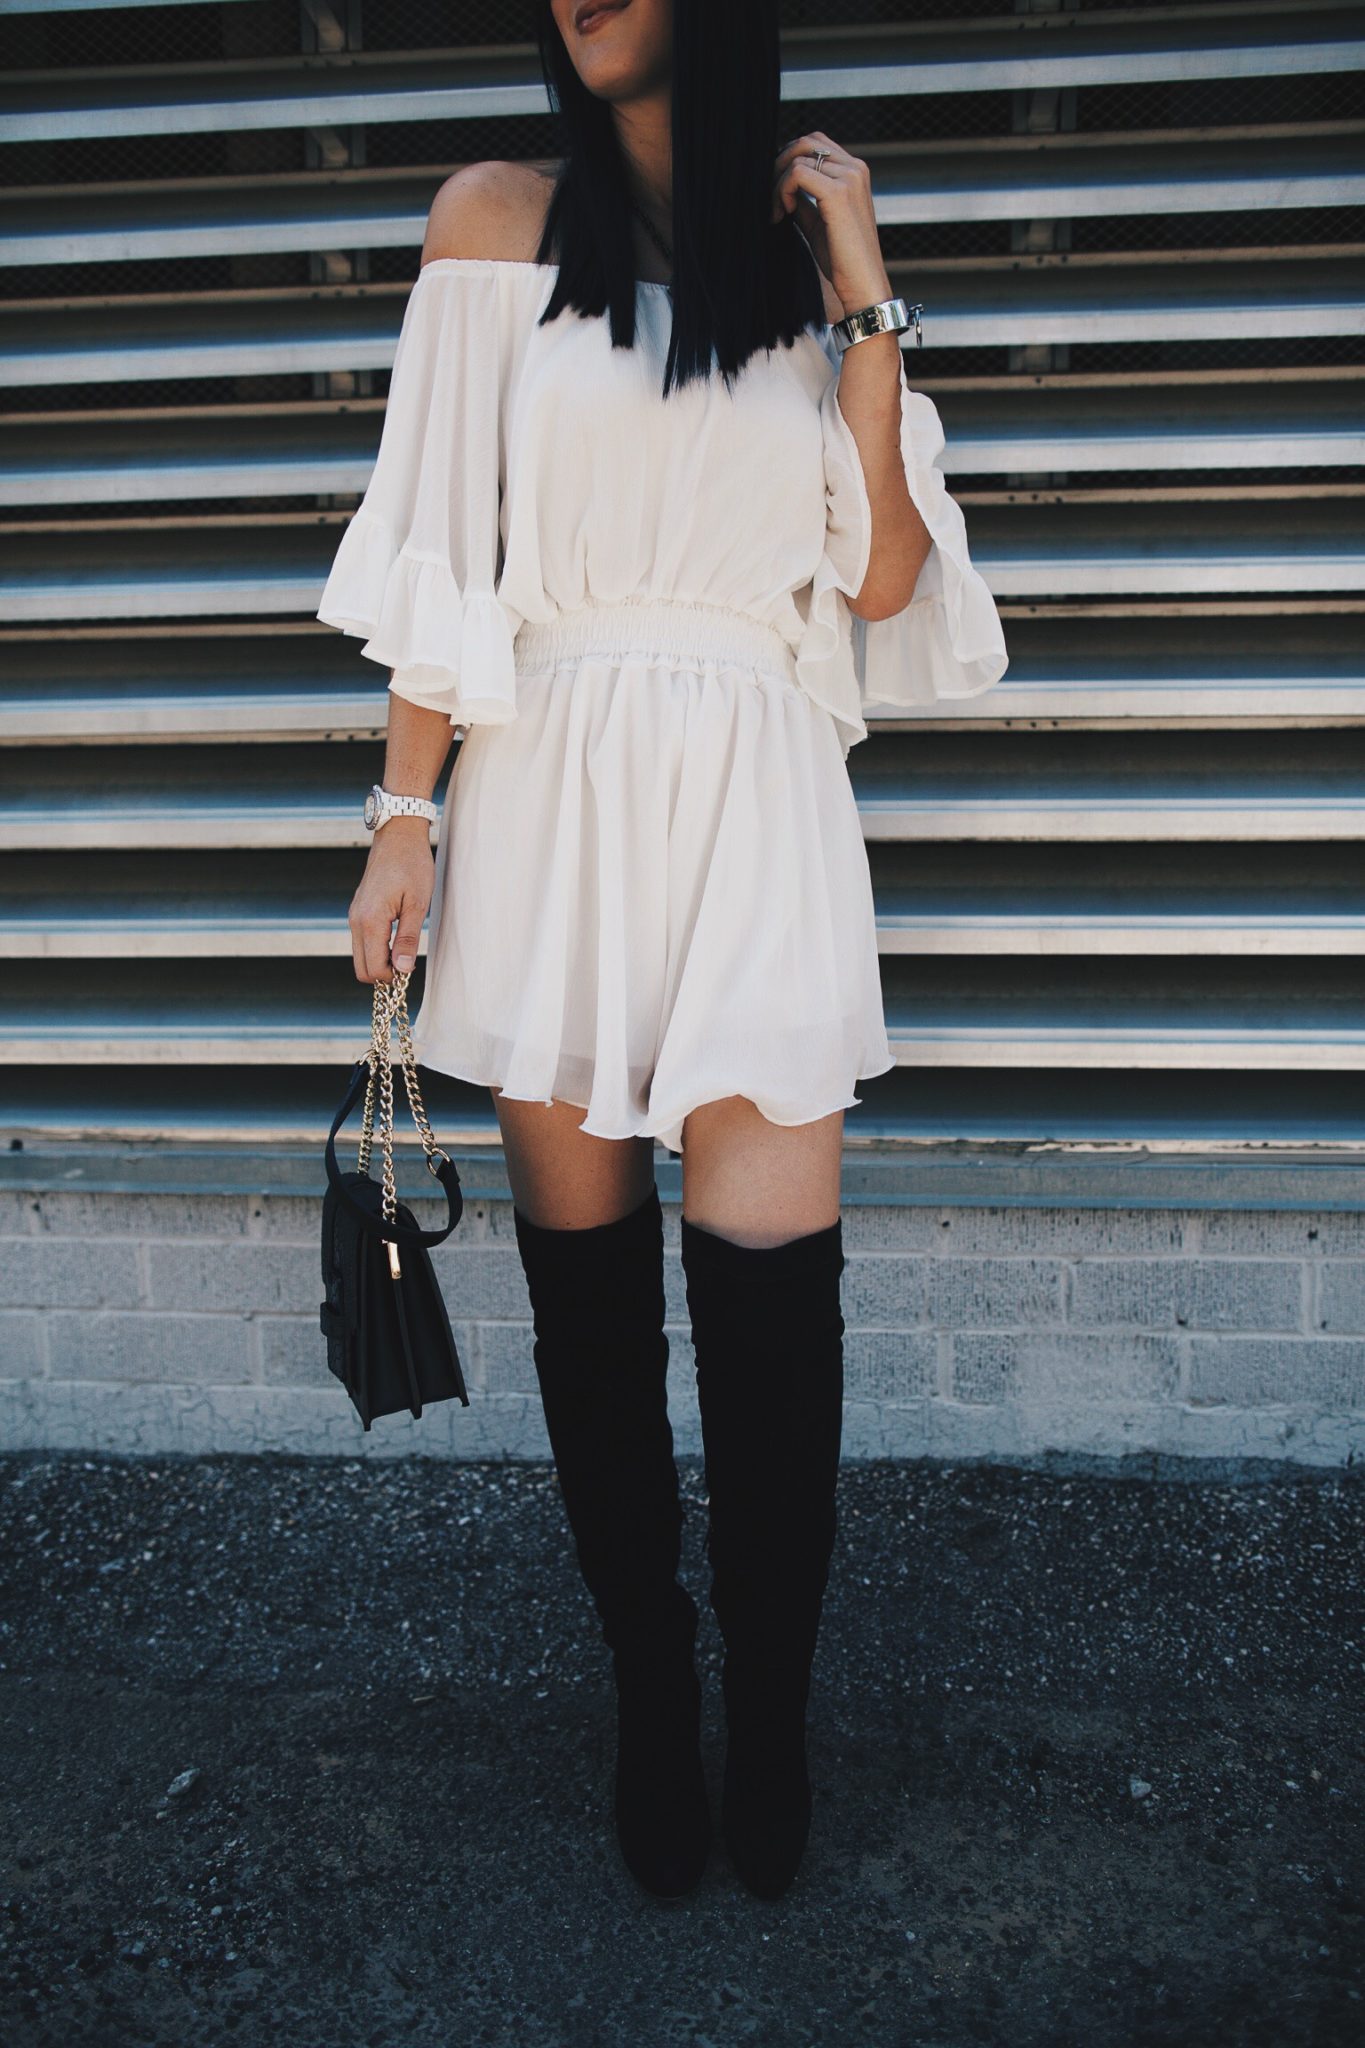 White Romper and Over the Knee Boots | how to style a romper | how to wear a romper | how to style OTK boots | how to wear OTK boots | summer fashion tips | summer outfit ideas | summer style tips | what to wear for summer | warm weather fashion | fashion for summer | style tips for summer | outfit ideas for summer || Dressed to Kill